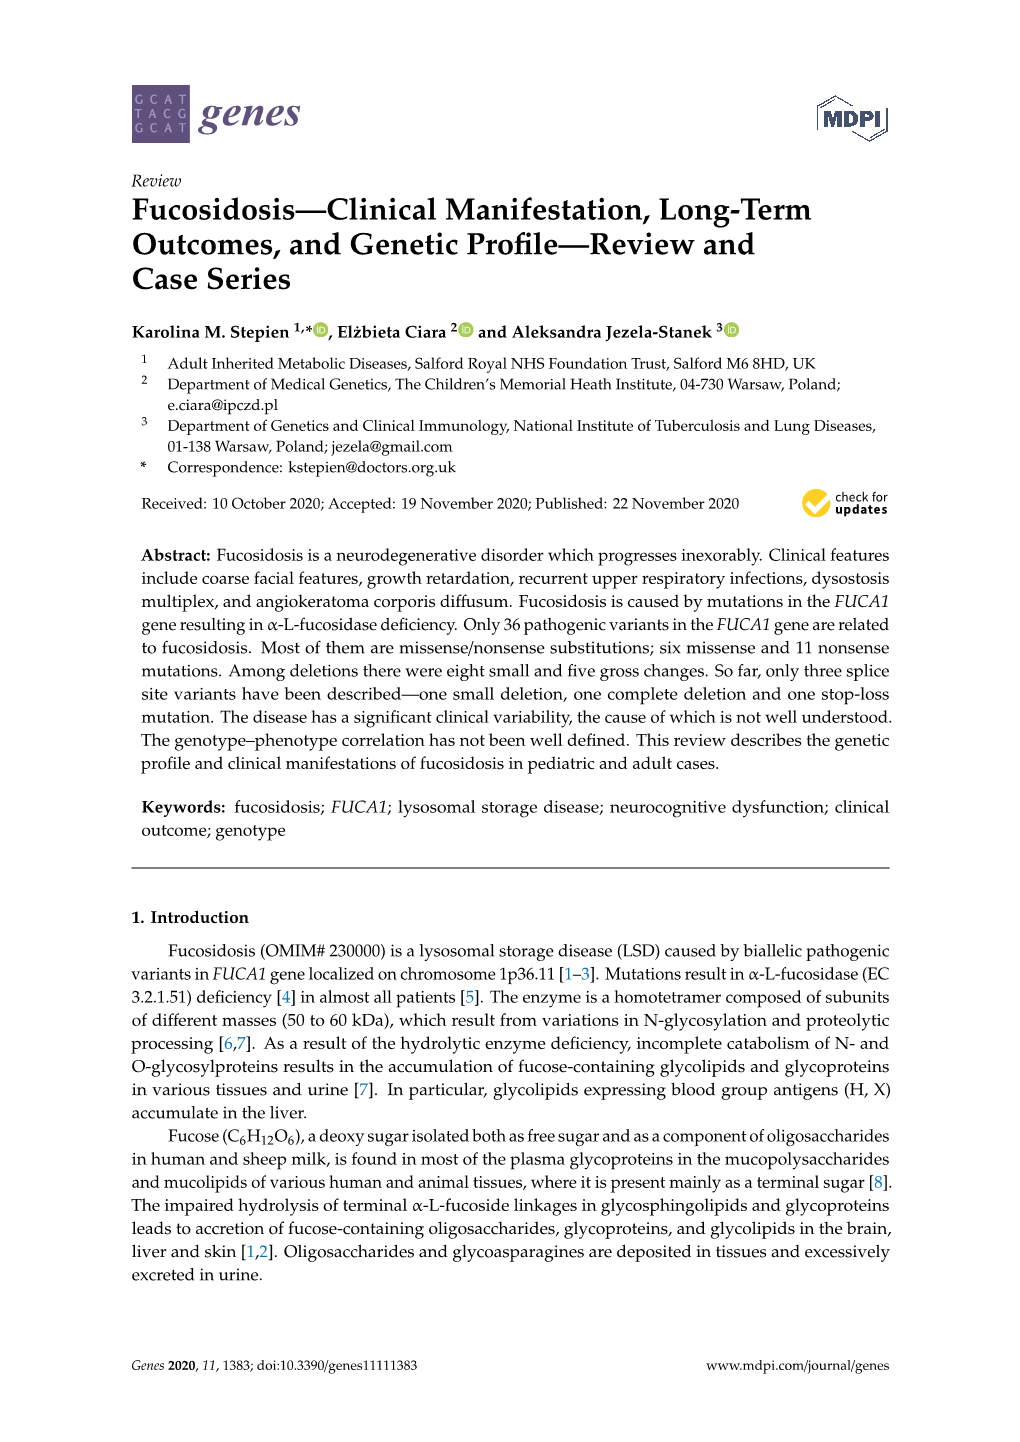 Fucosidosis—Clinical Manifestation, Long-Term Outcomes, and Genetic Proﬁle—Review and Case Series